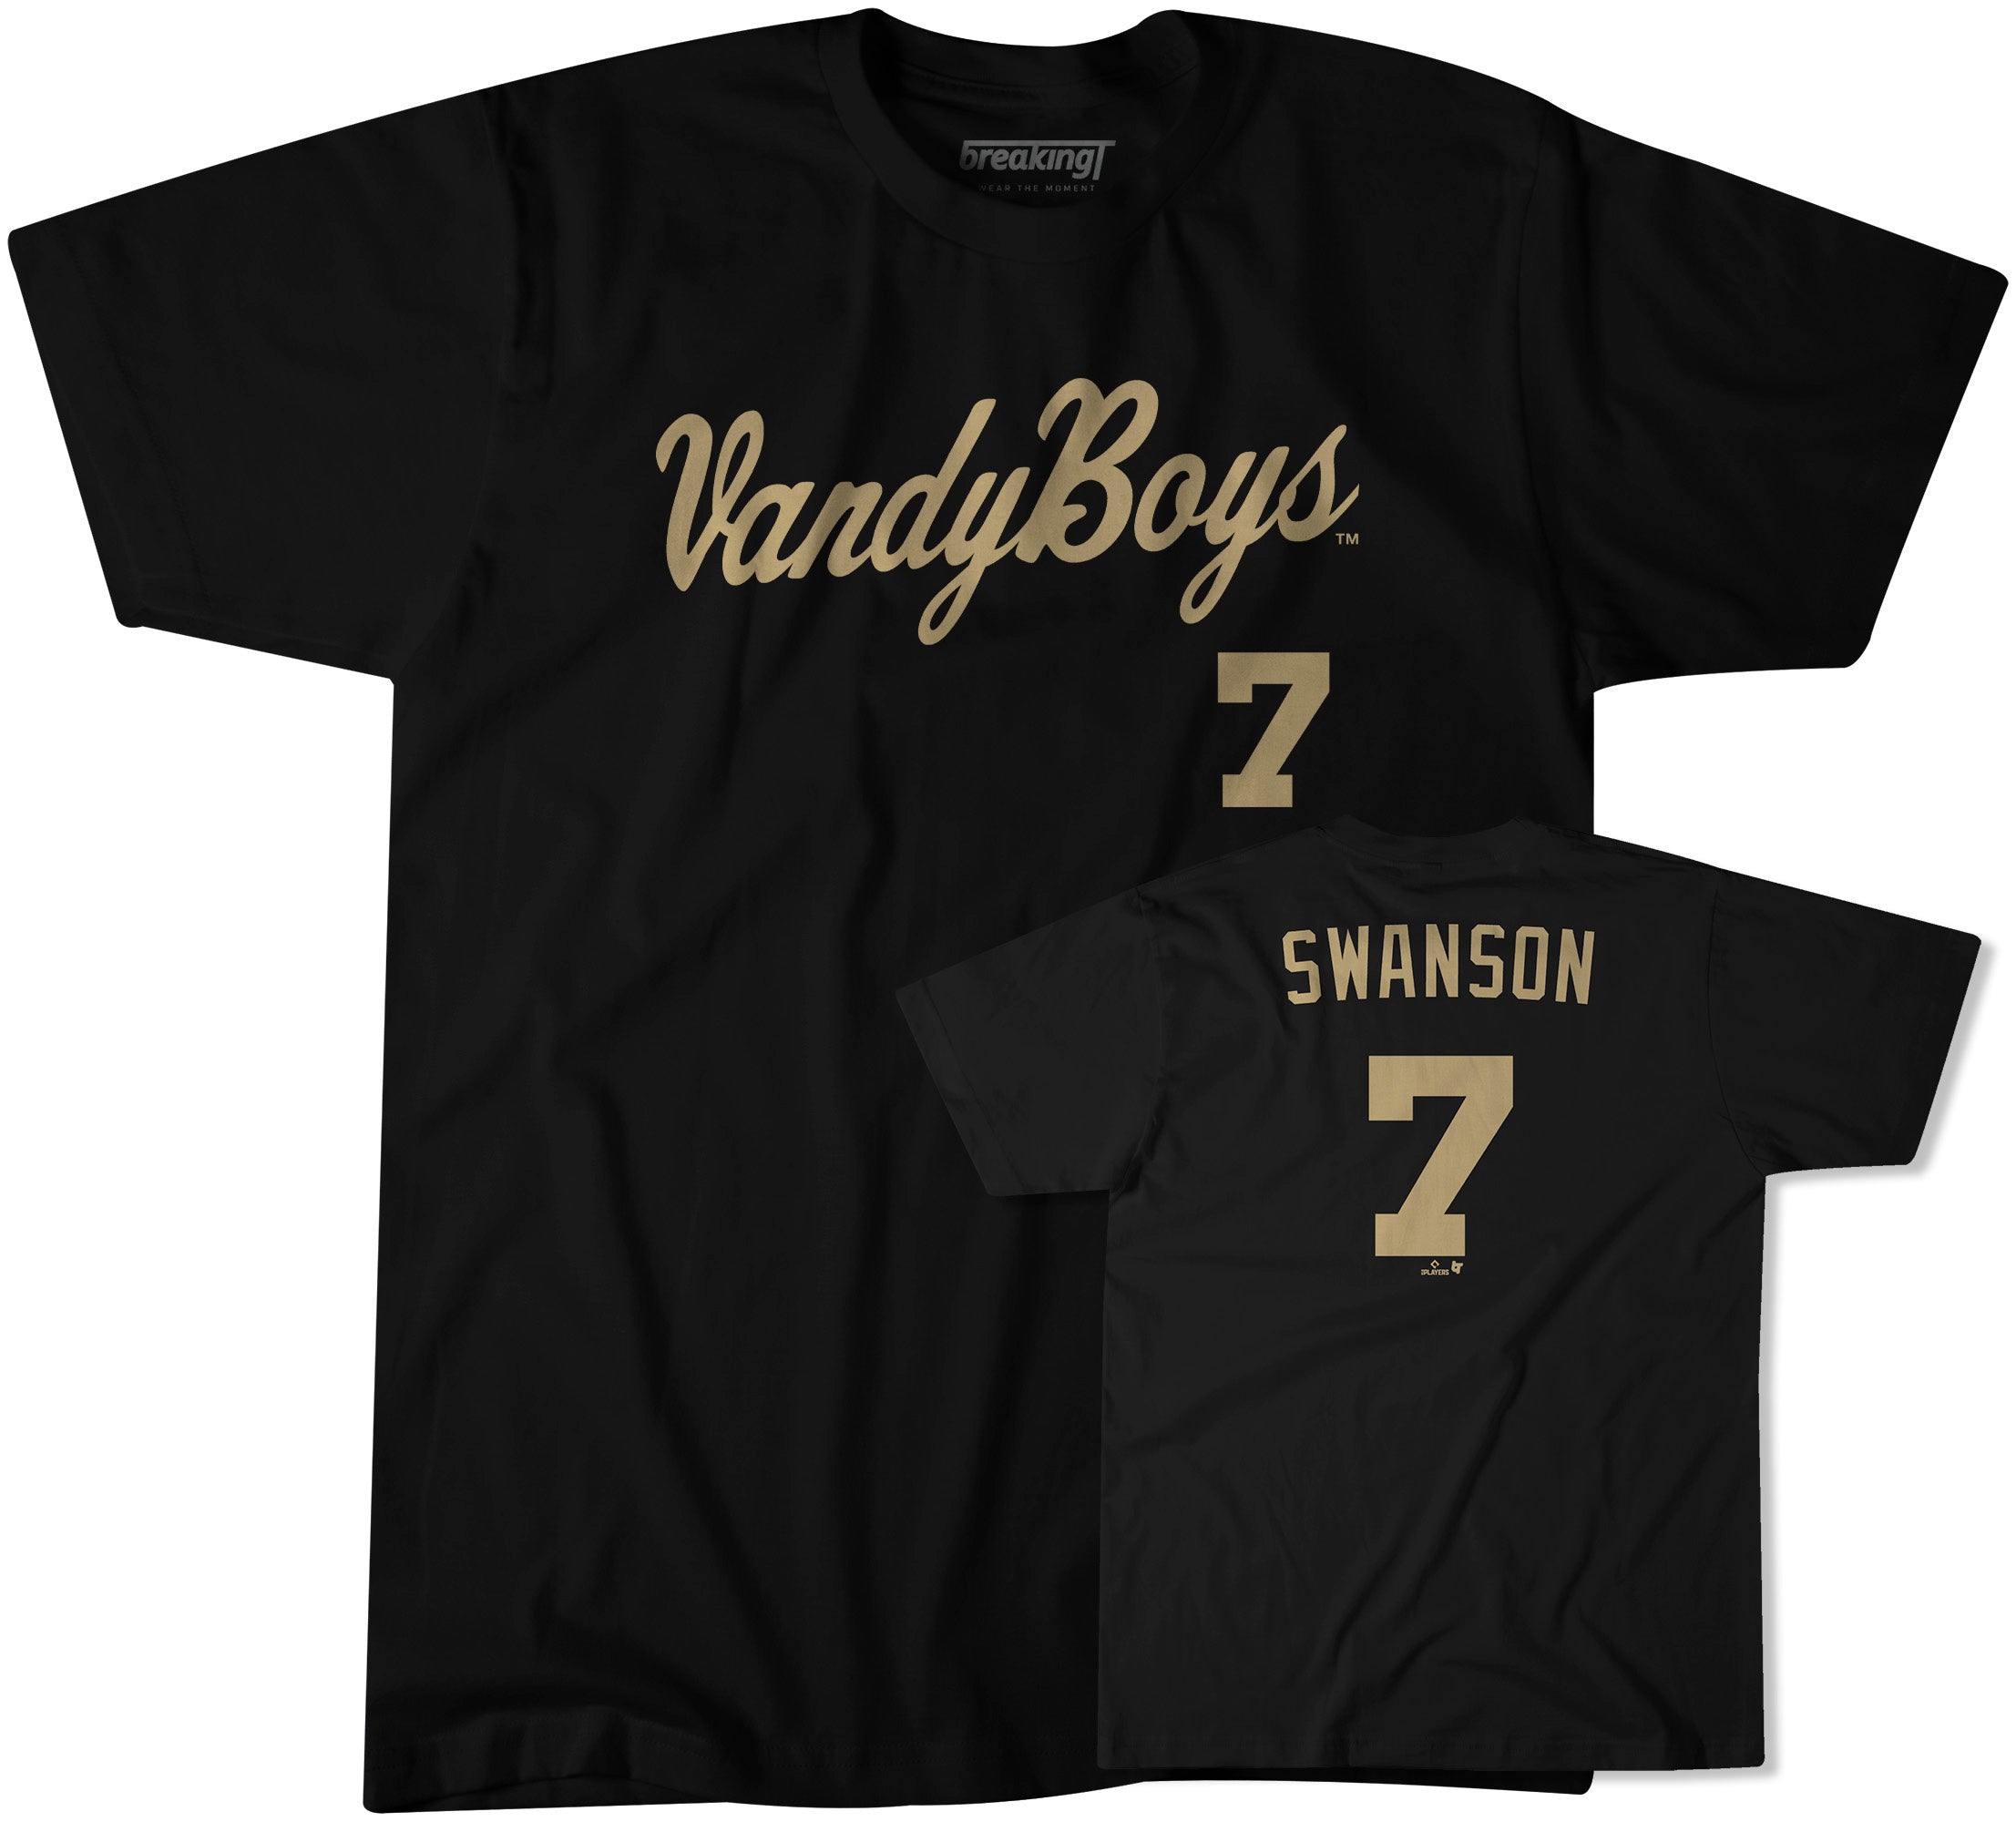 Dansby Swanson Apparel, Dansby Swanson Jersey, Shirt